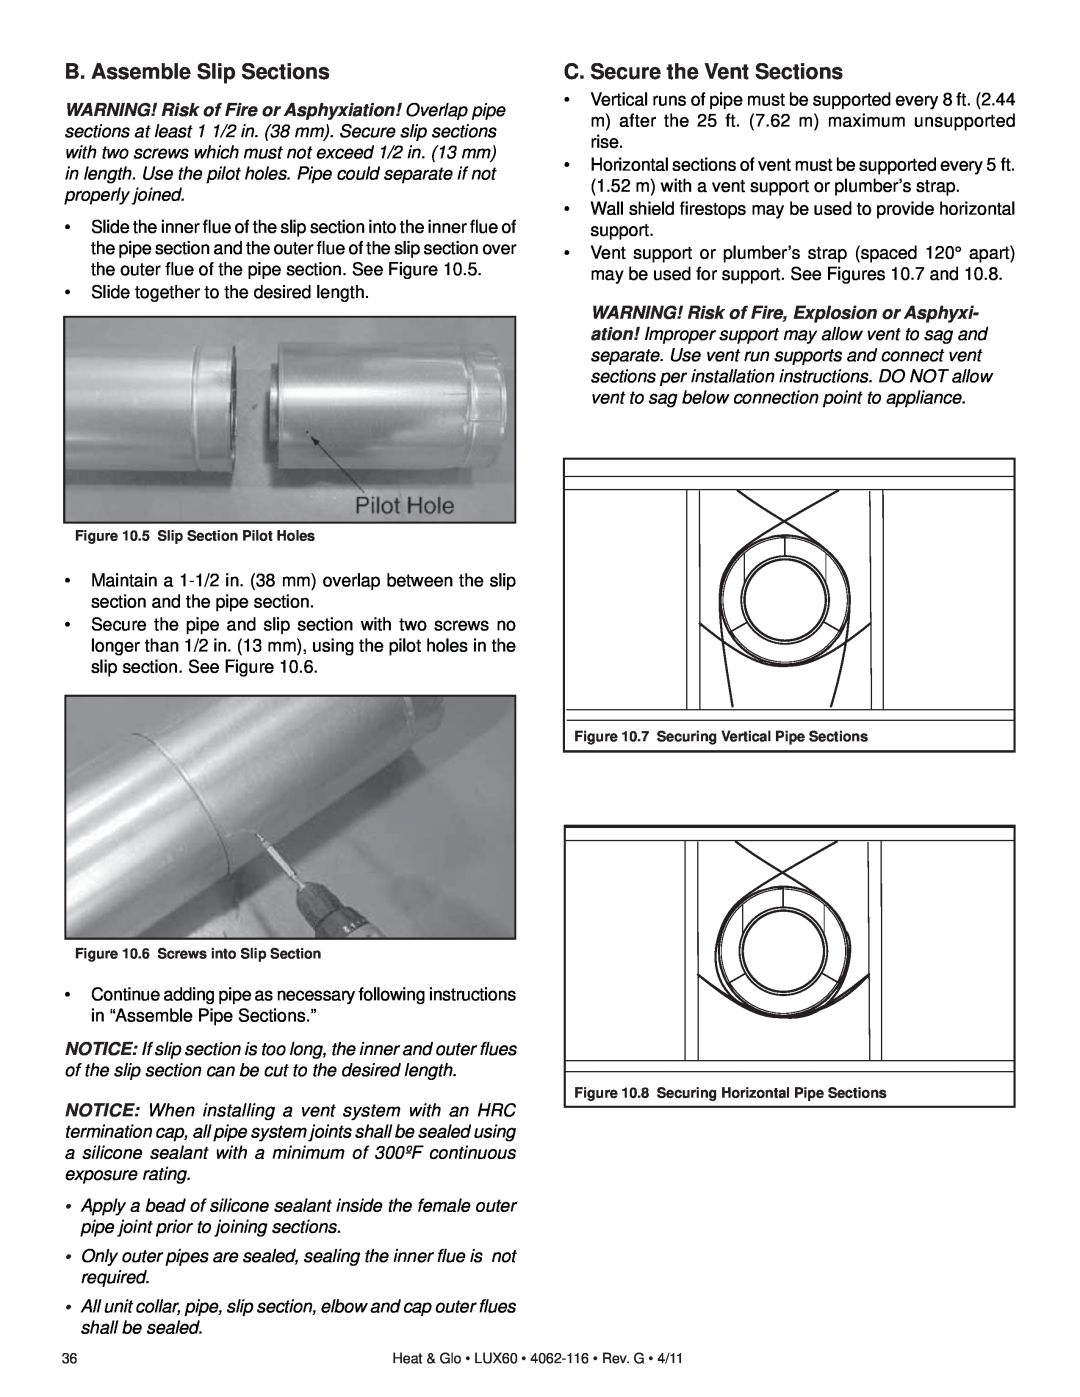 Heat & Glo LifeStyle LUX60 owner manual B. Assemble Slip Sections, C. Secure the Vent Sections 